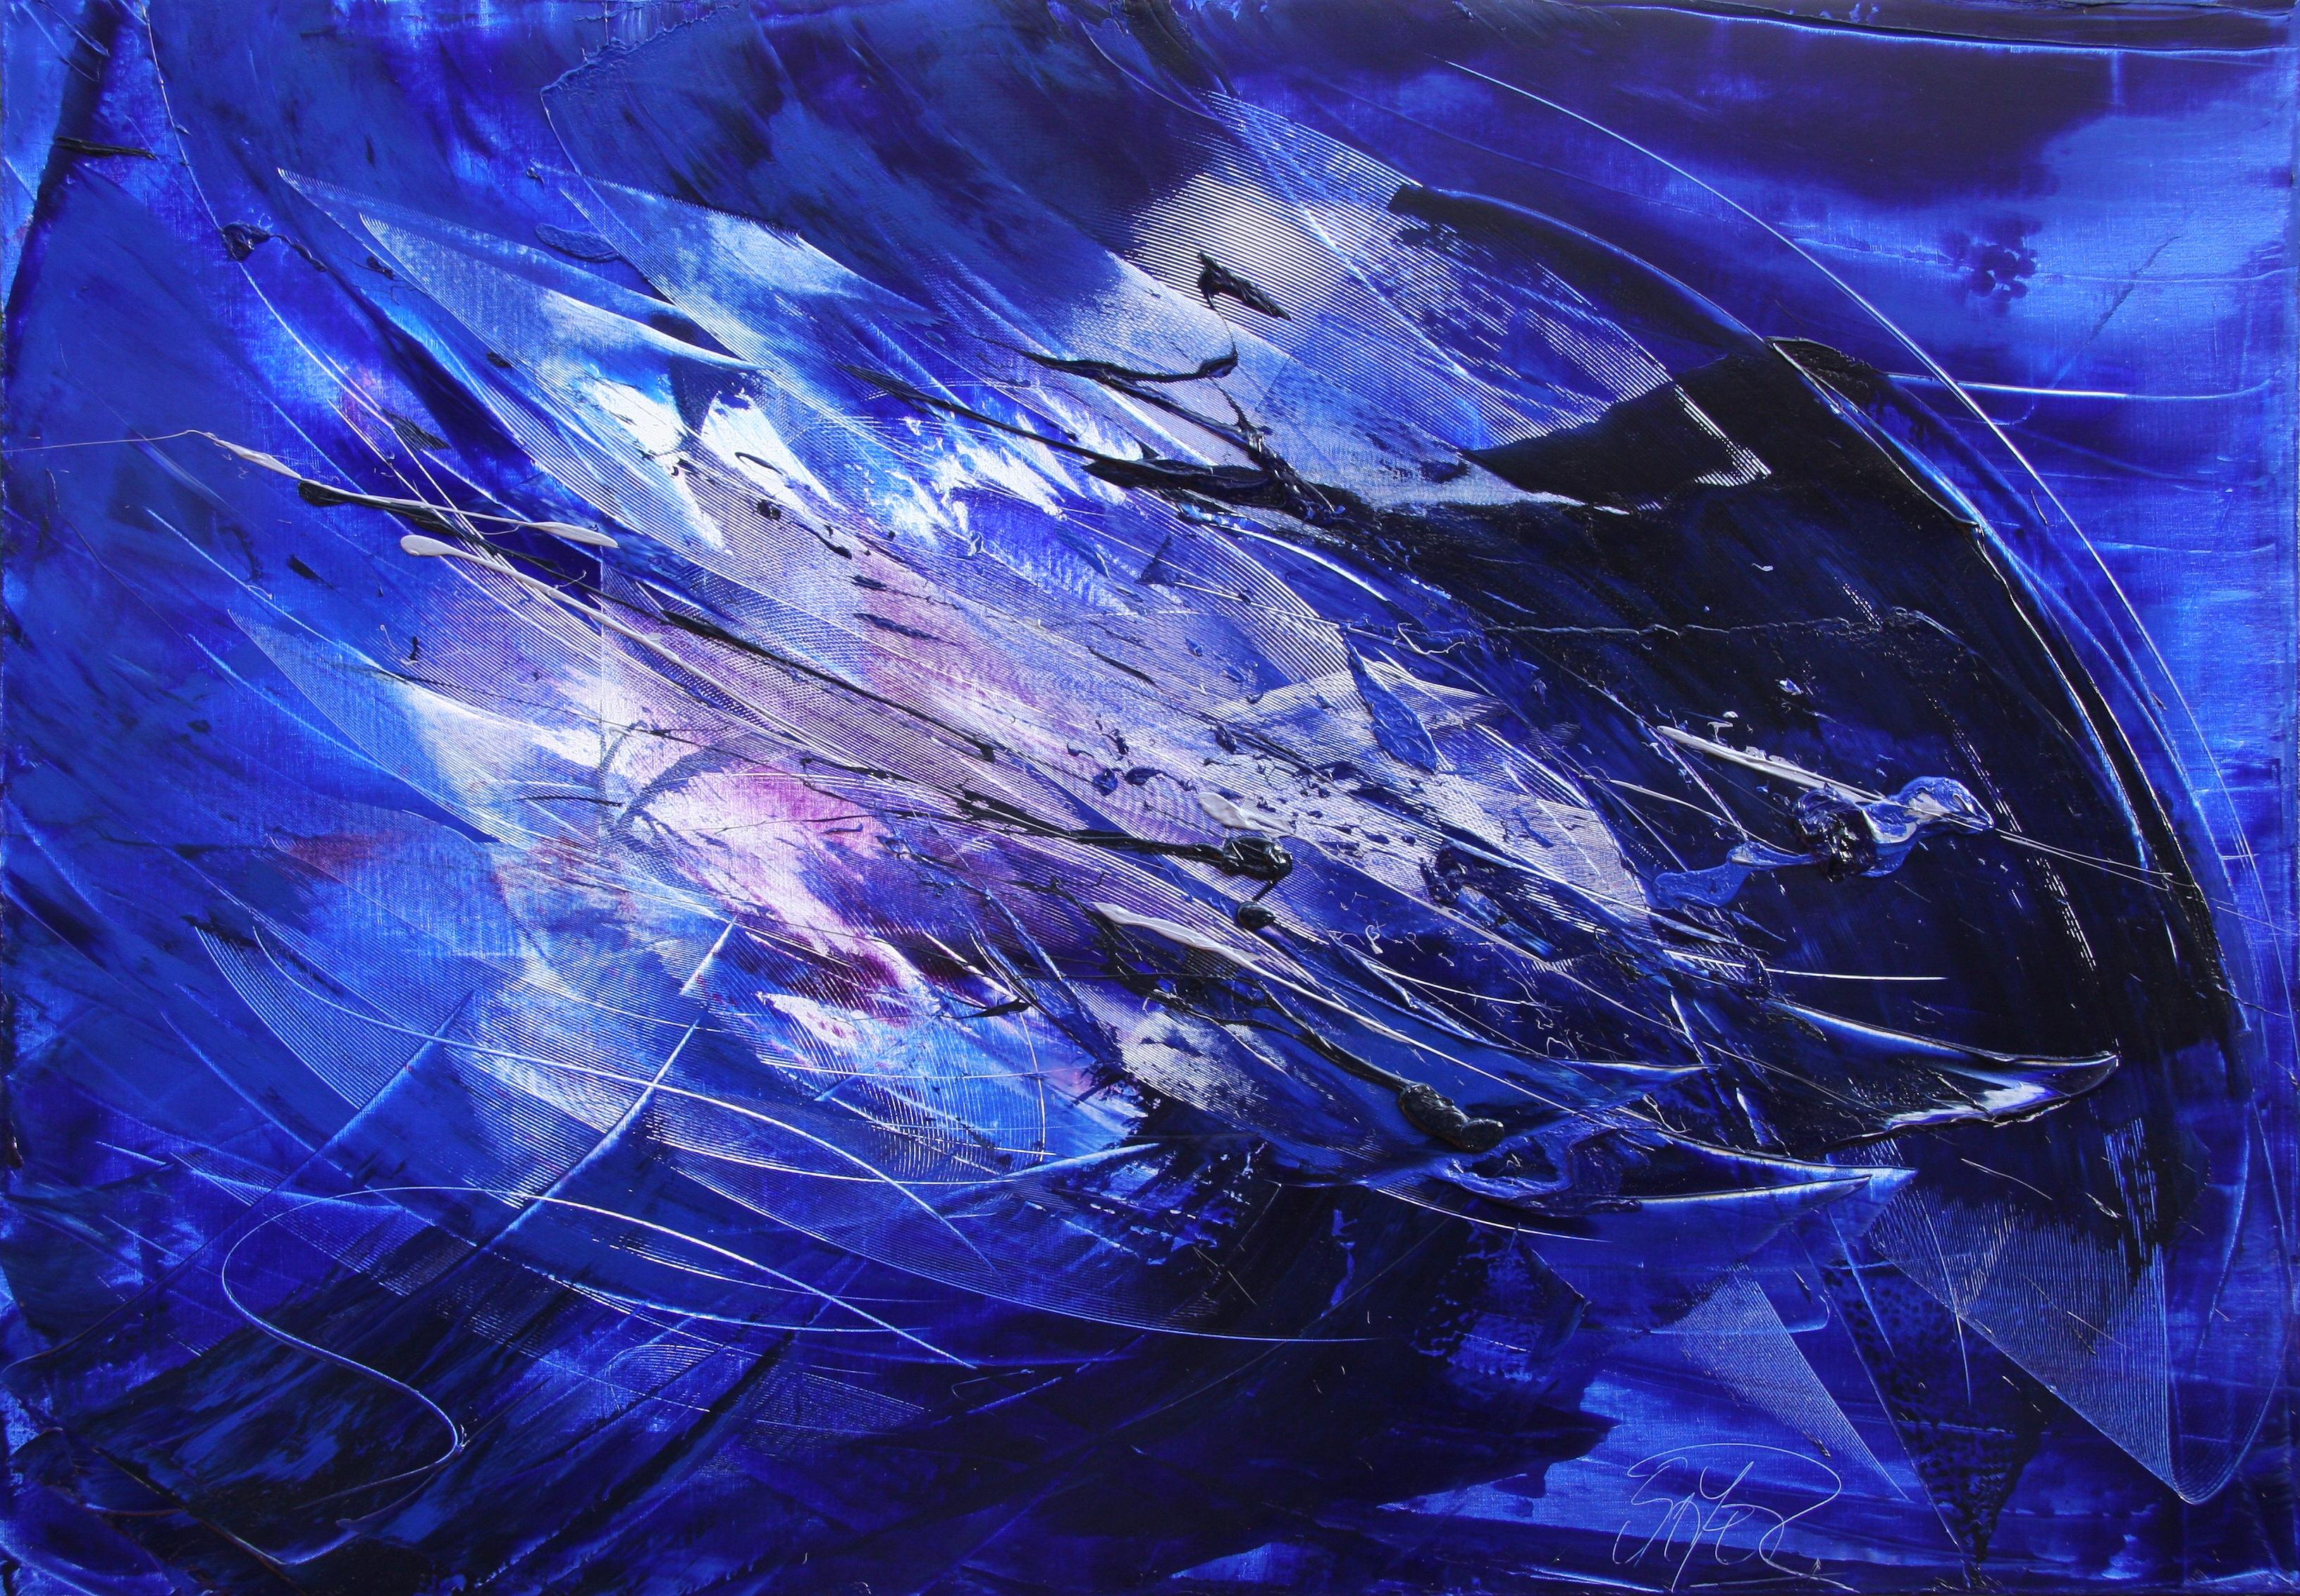 Jean Soyer Abstract Painting - Blue, White and Purple Blizzard-like Lyrical Abstraction Oil Painting, Untitled